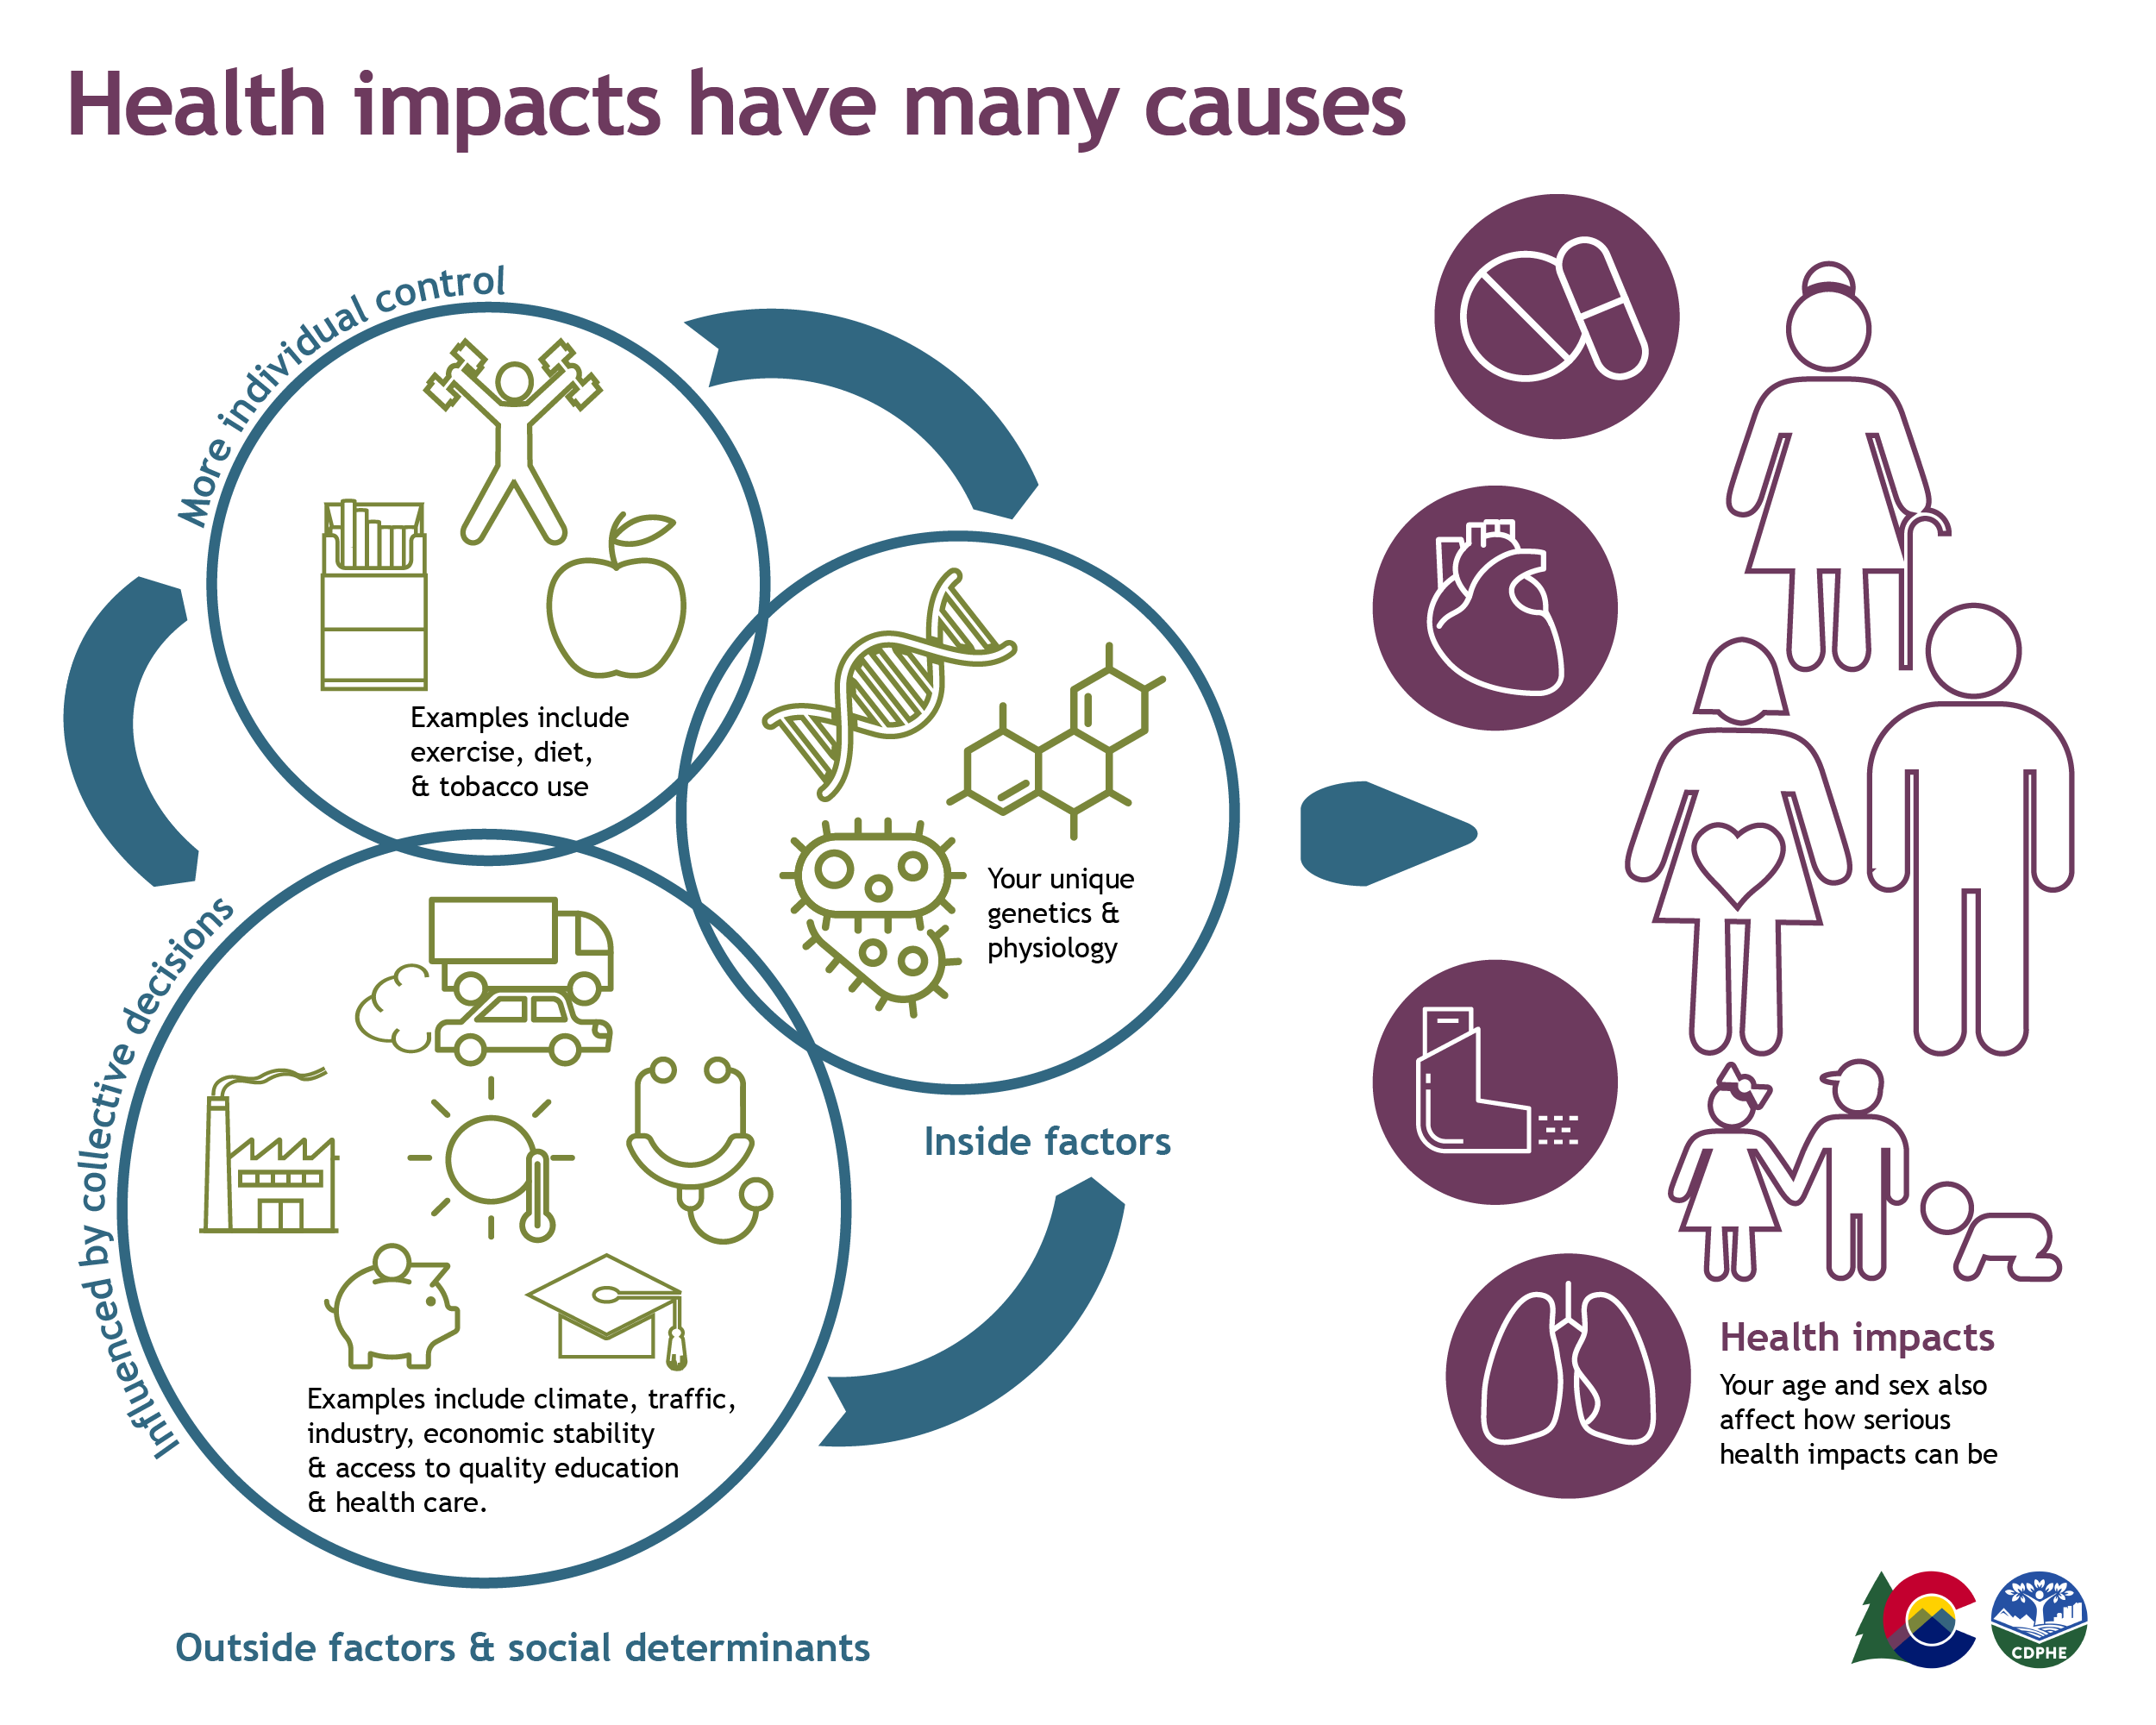 Graphic shows that health impacts can result from a combination of many factors